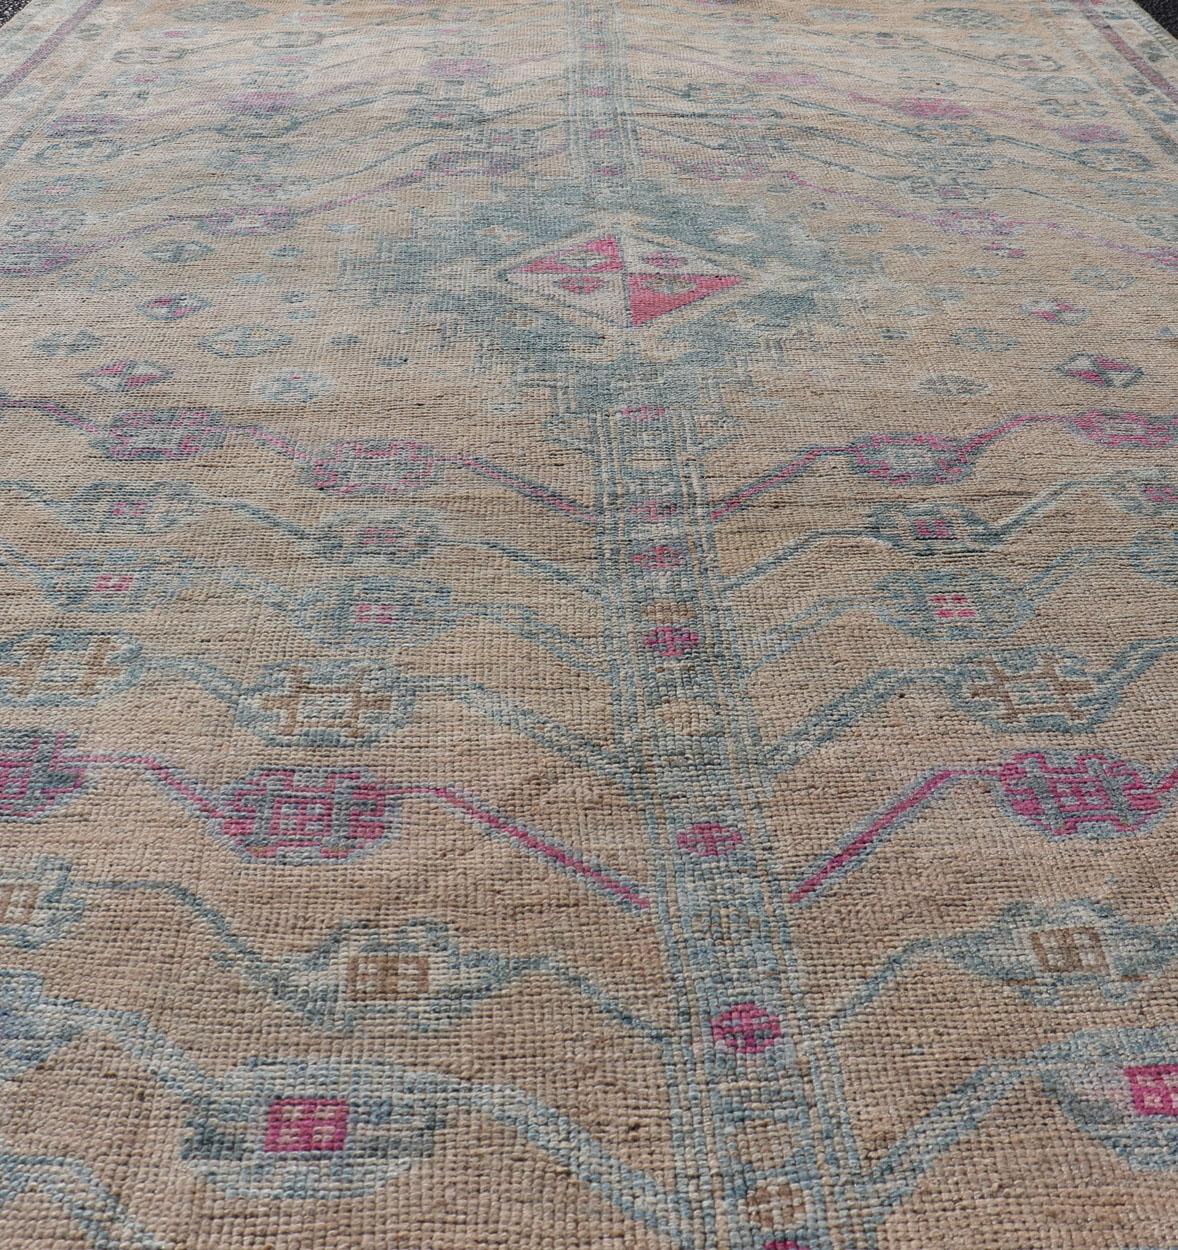 Vintage Persian Shiraz with Tribal Design in Soft Yellow, Pink, and Blue Gray 5